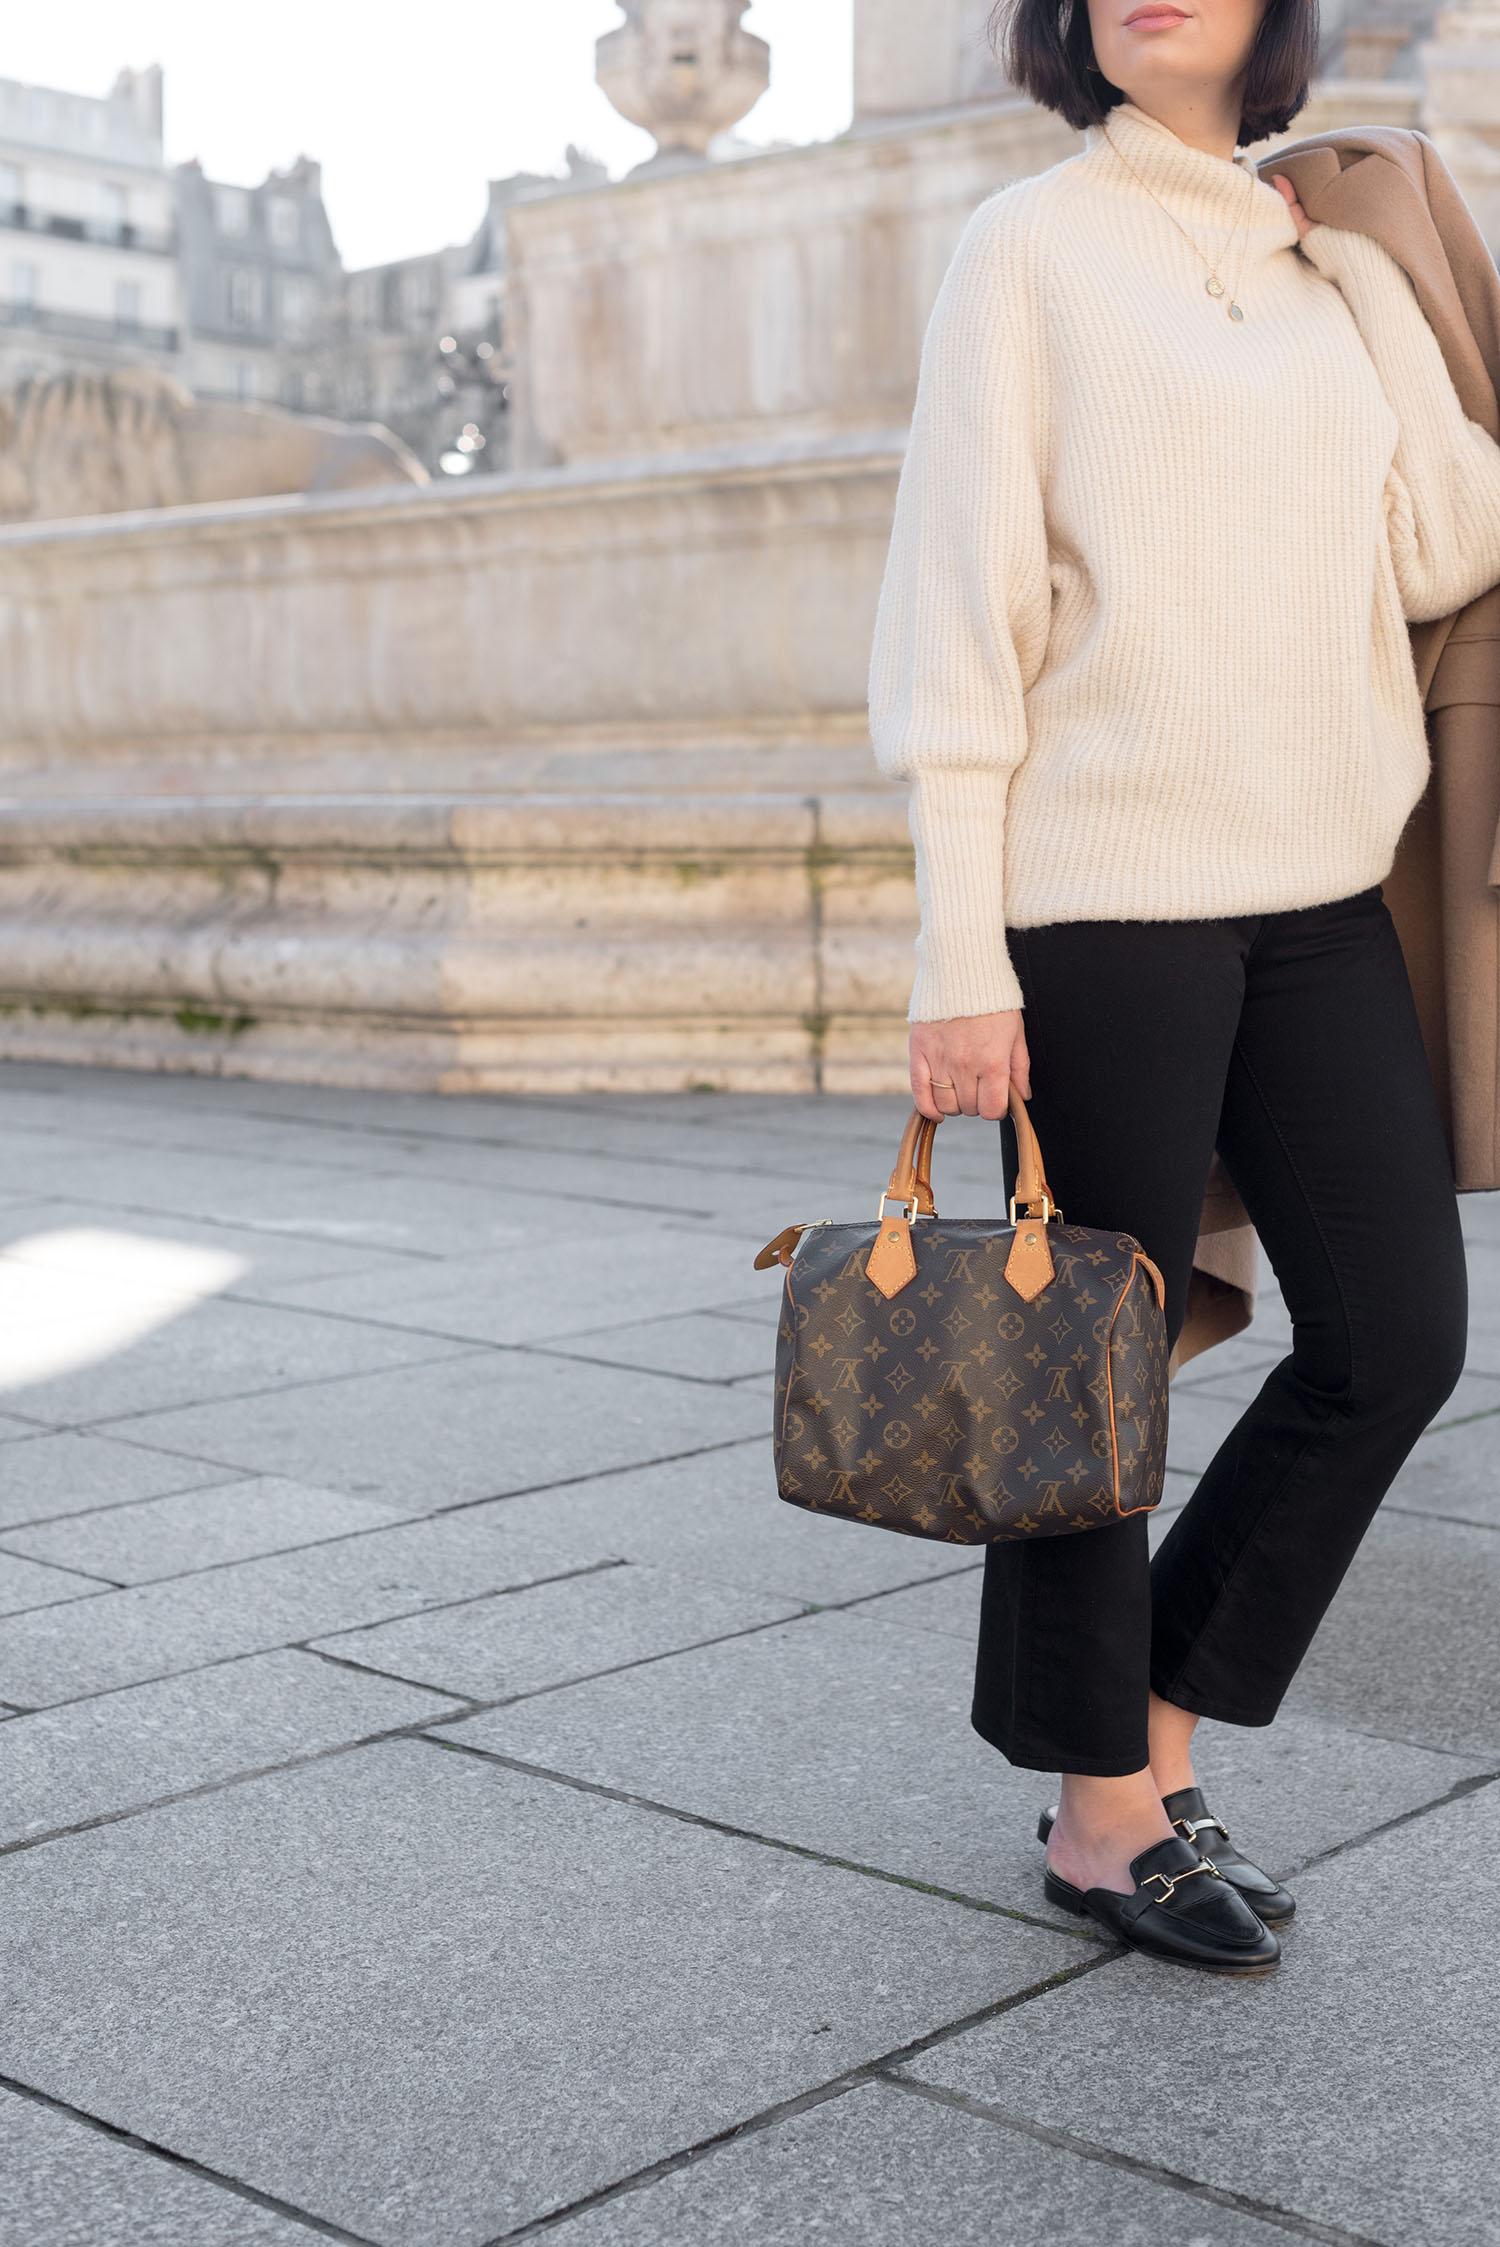 Outfit details on top Canadian fashion blogger Cee Fardoe of Coco & Vera, including Mavi crop flared jeans and a Louis Vuitton Speedy 25 handbag